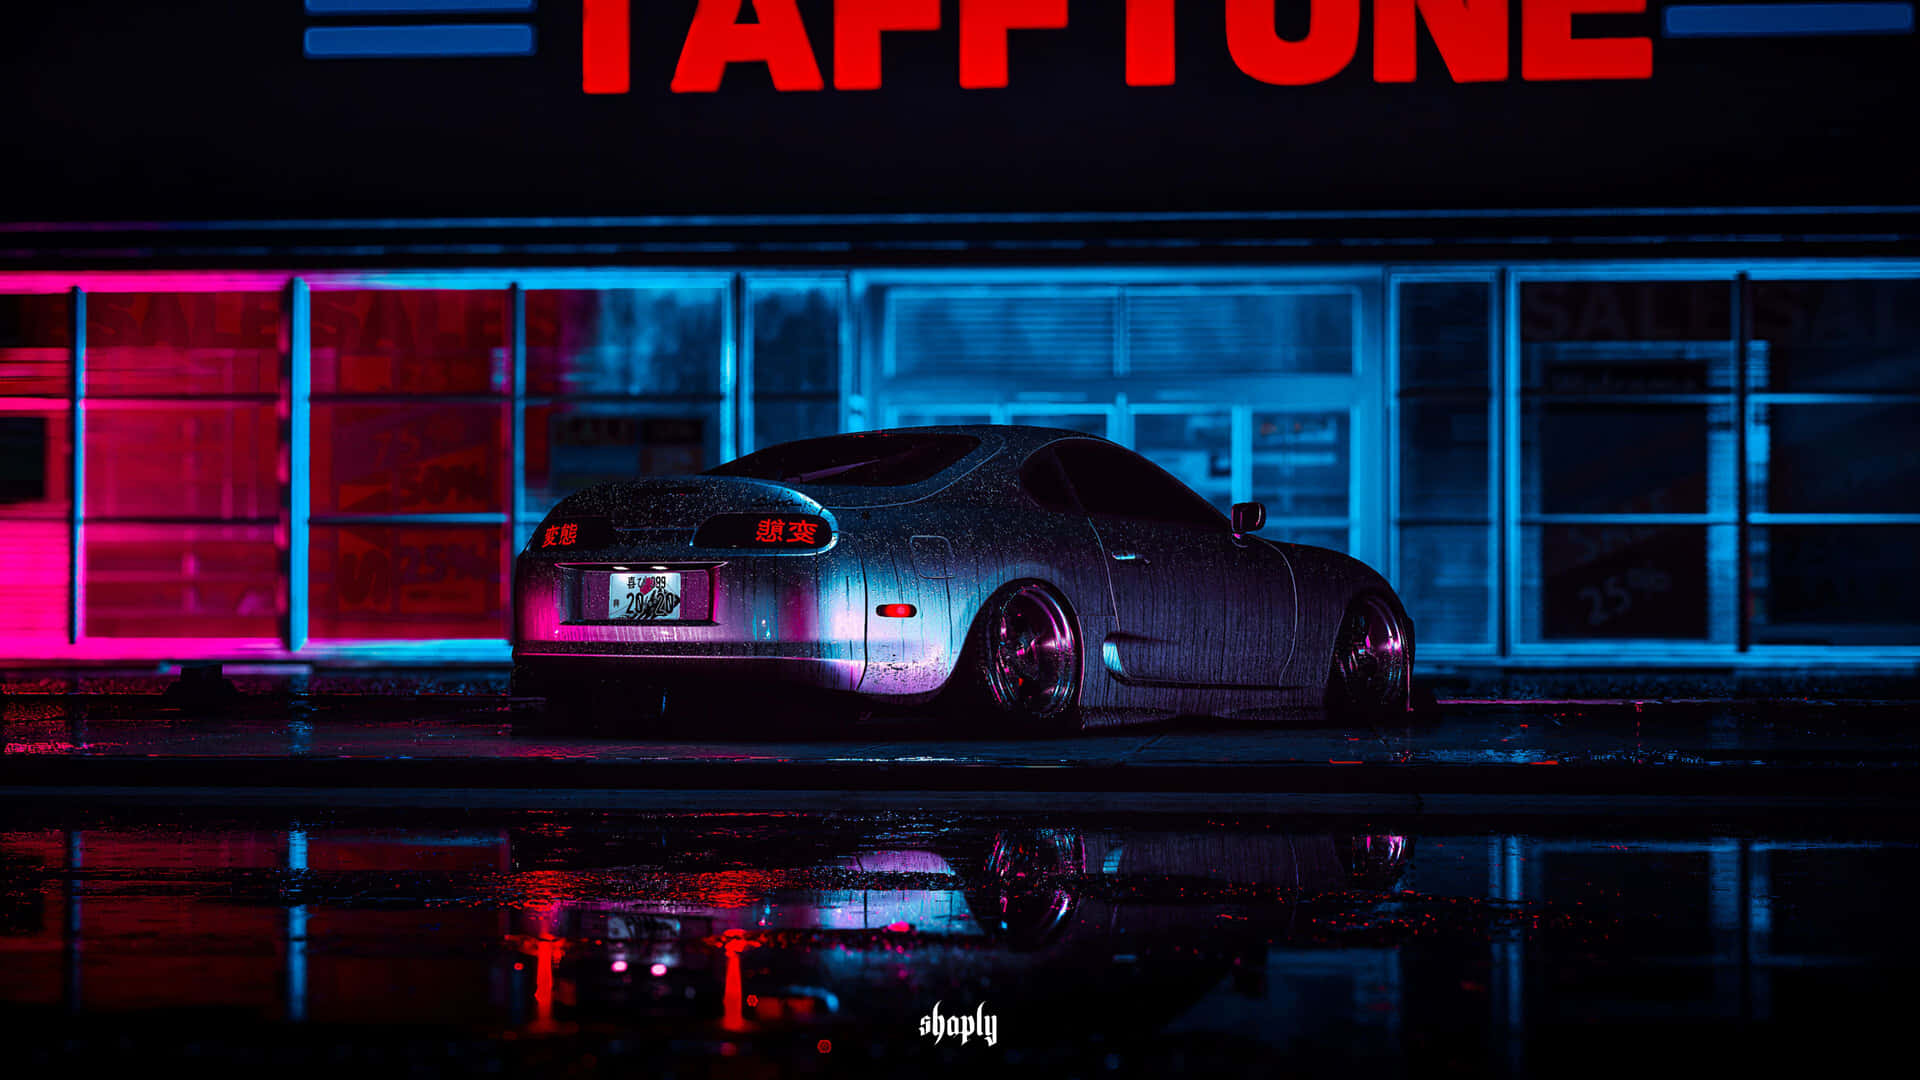 "A Classic JDM Supra Just Waiting to Get on the Track" Wallpaper